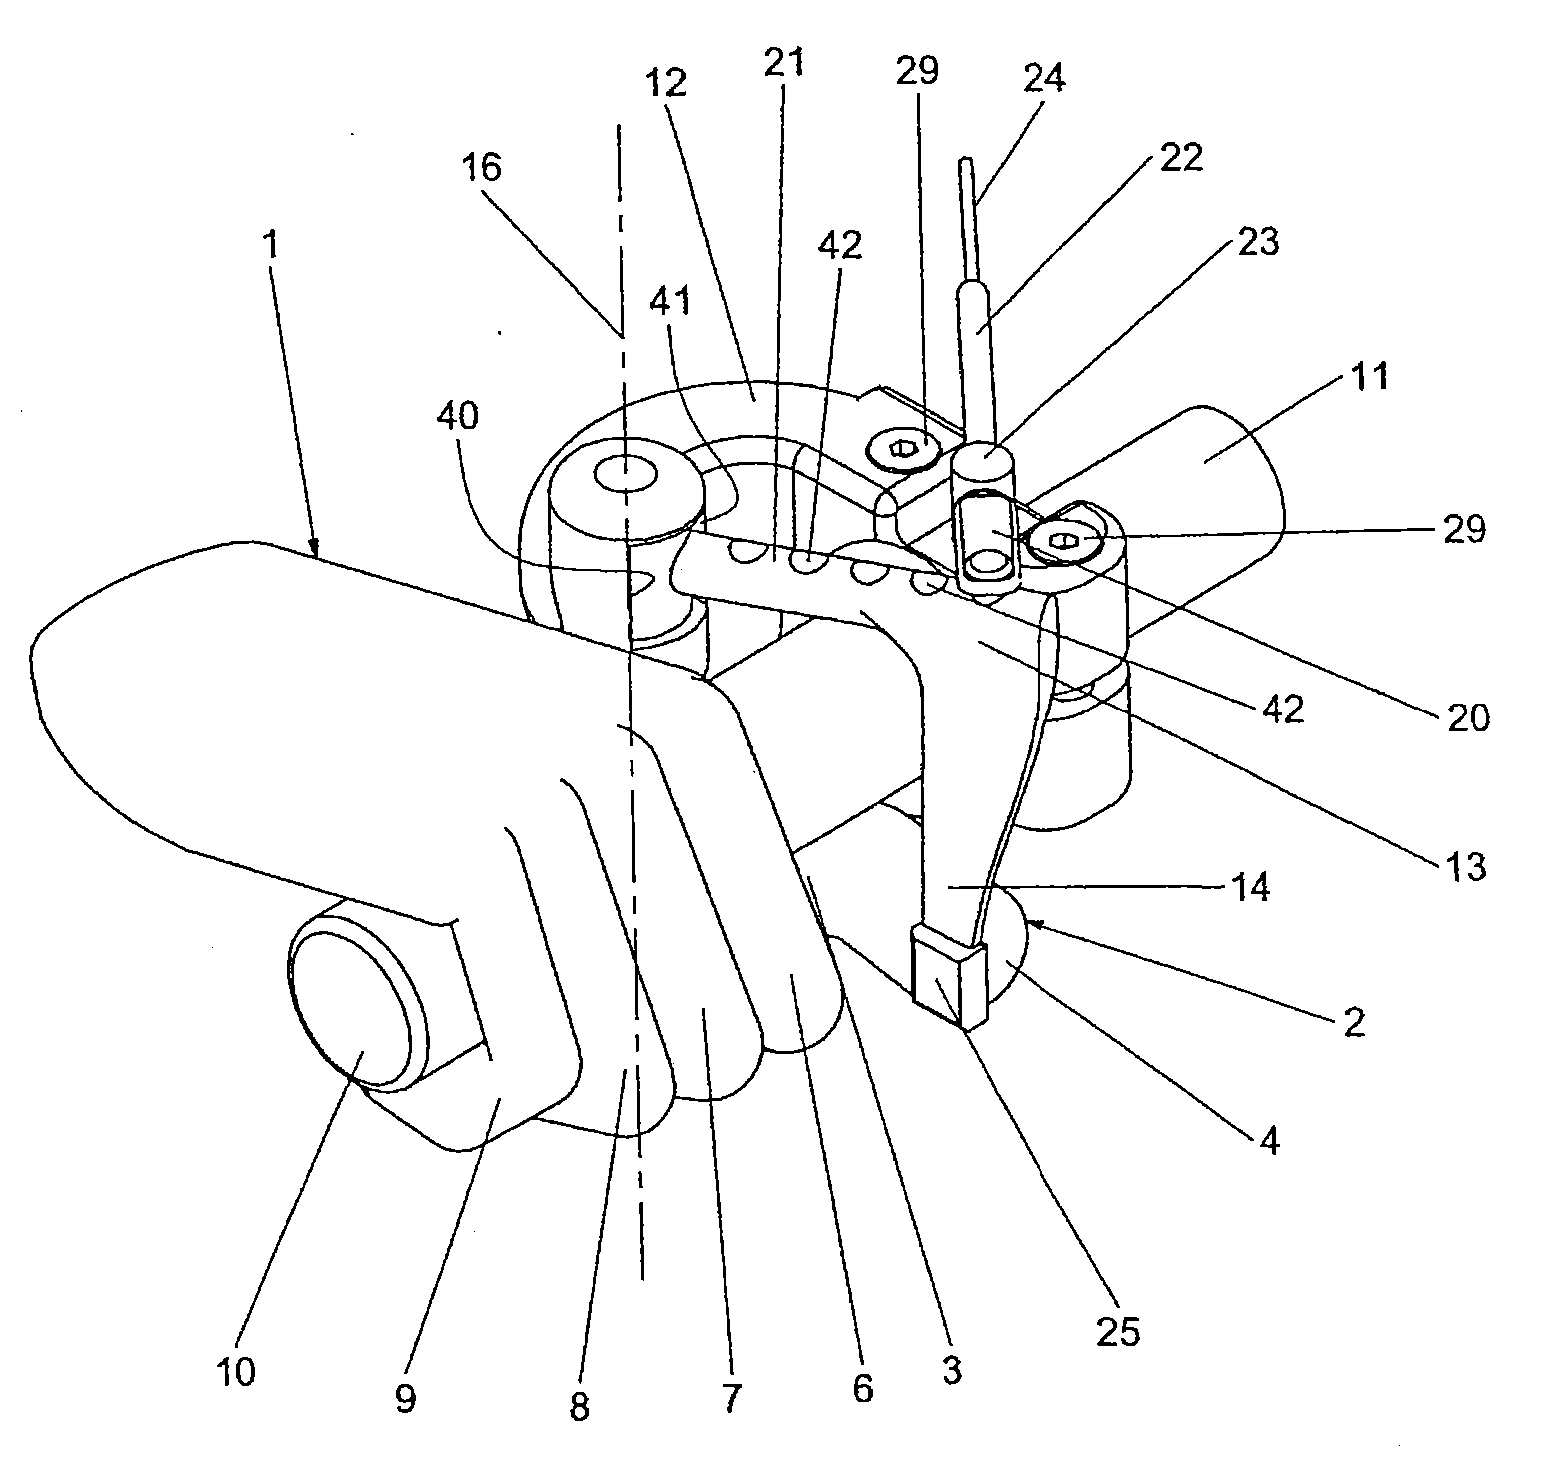 Control device with thumb trigger